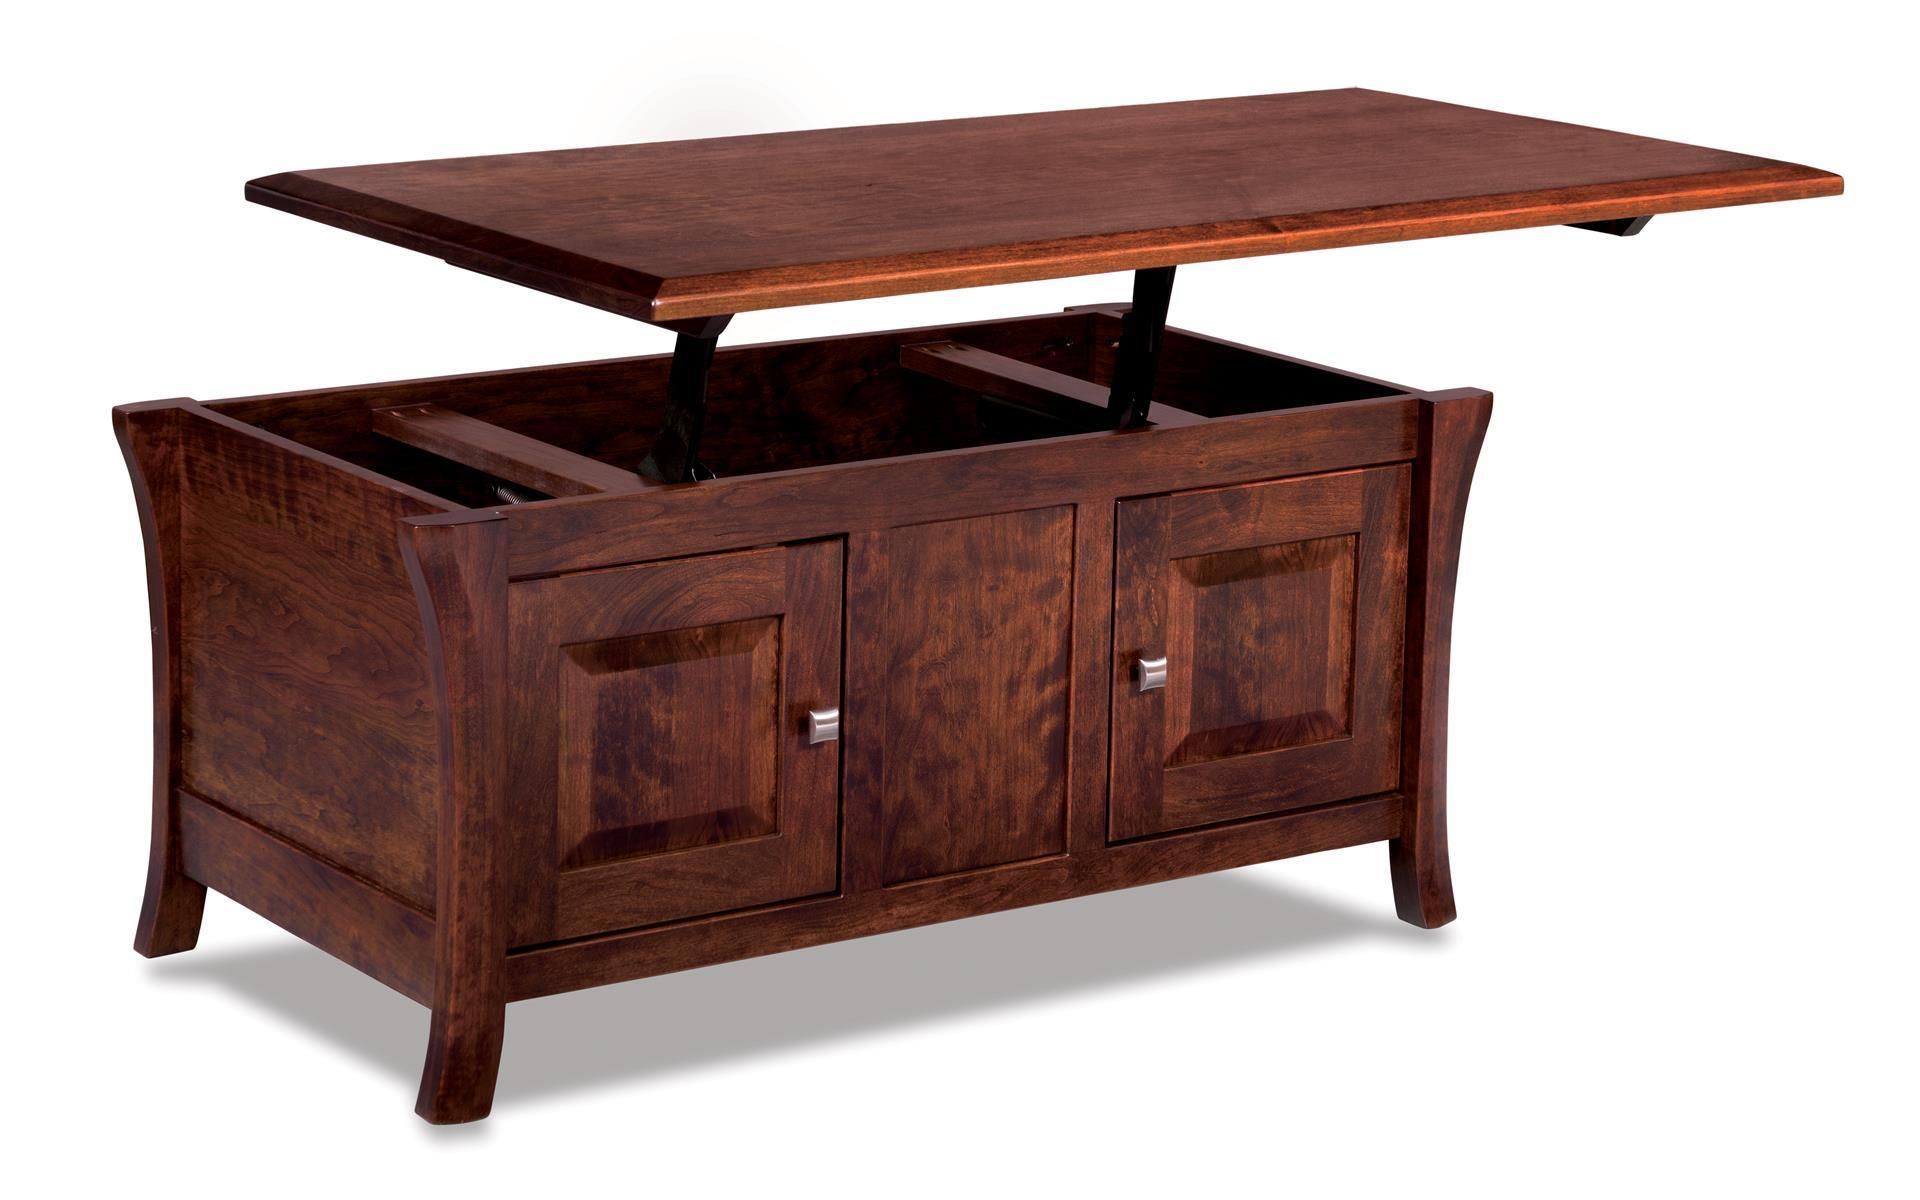 45" Lift Top Coffee Table Cabinet From Dutchcrafters Amish Furniture Inside Wood Lift Top Coffee Tables (View 2 of 15)